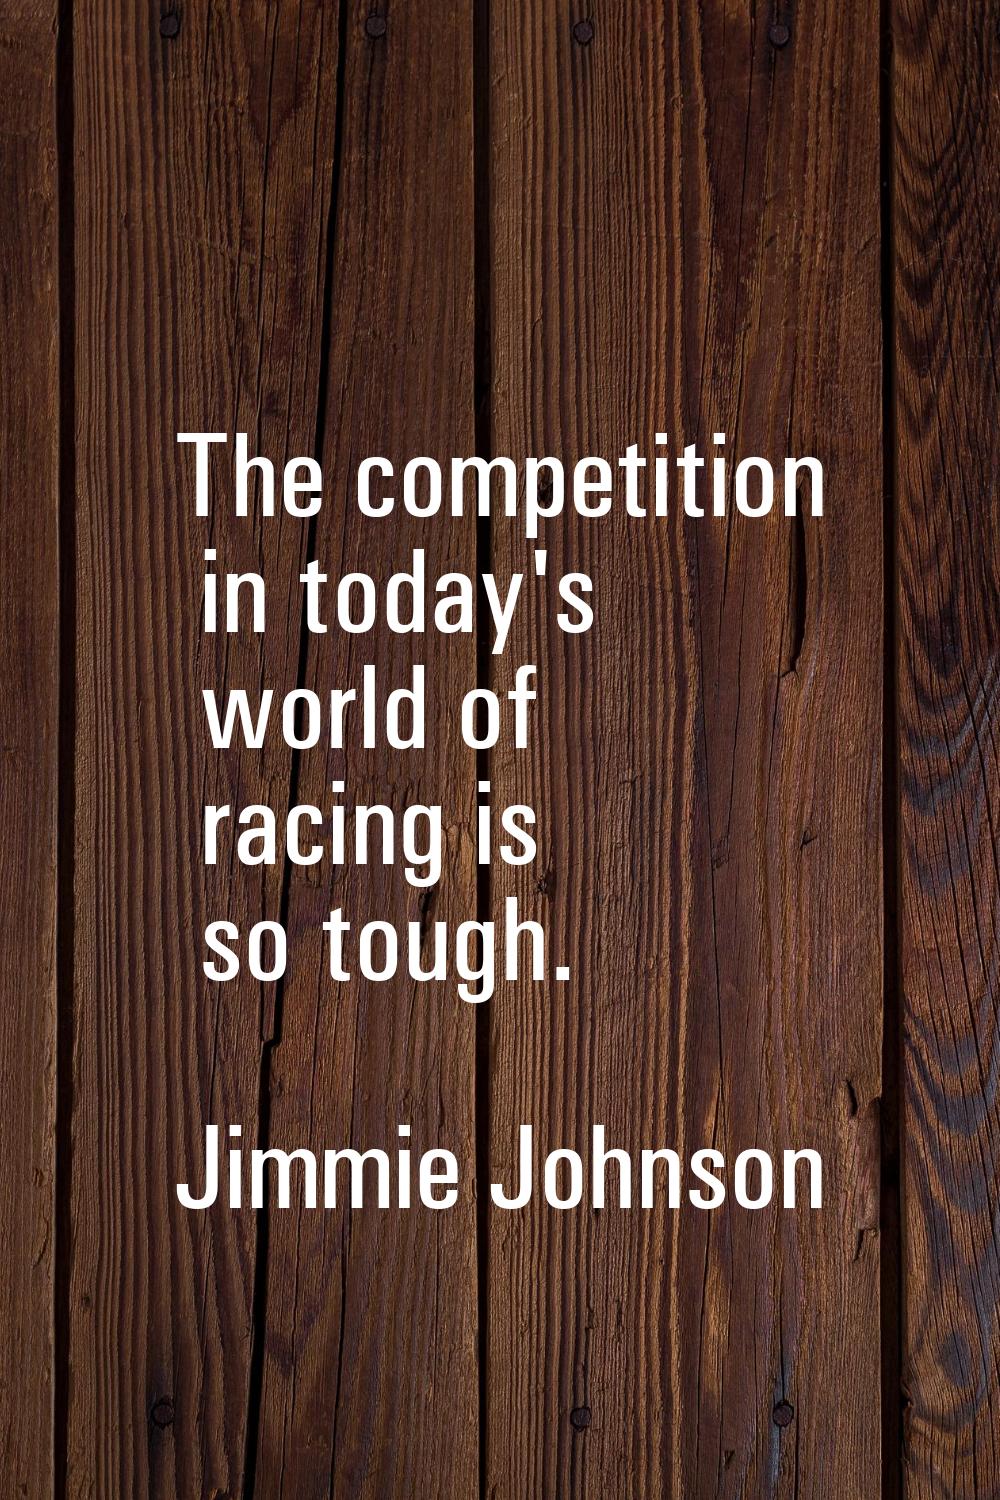 The competition in today's world of racing is so tough.